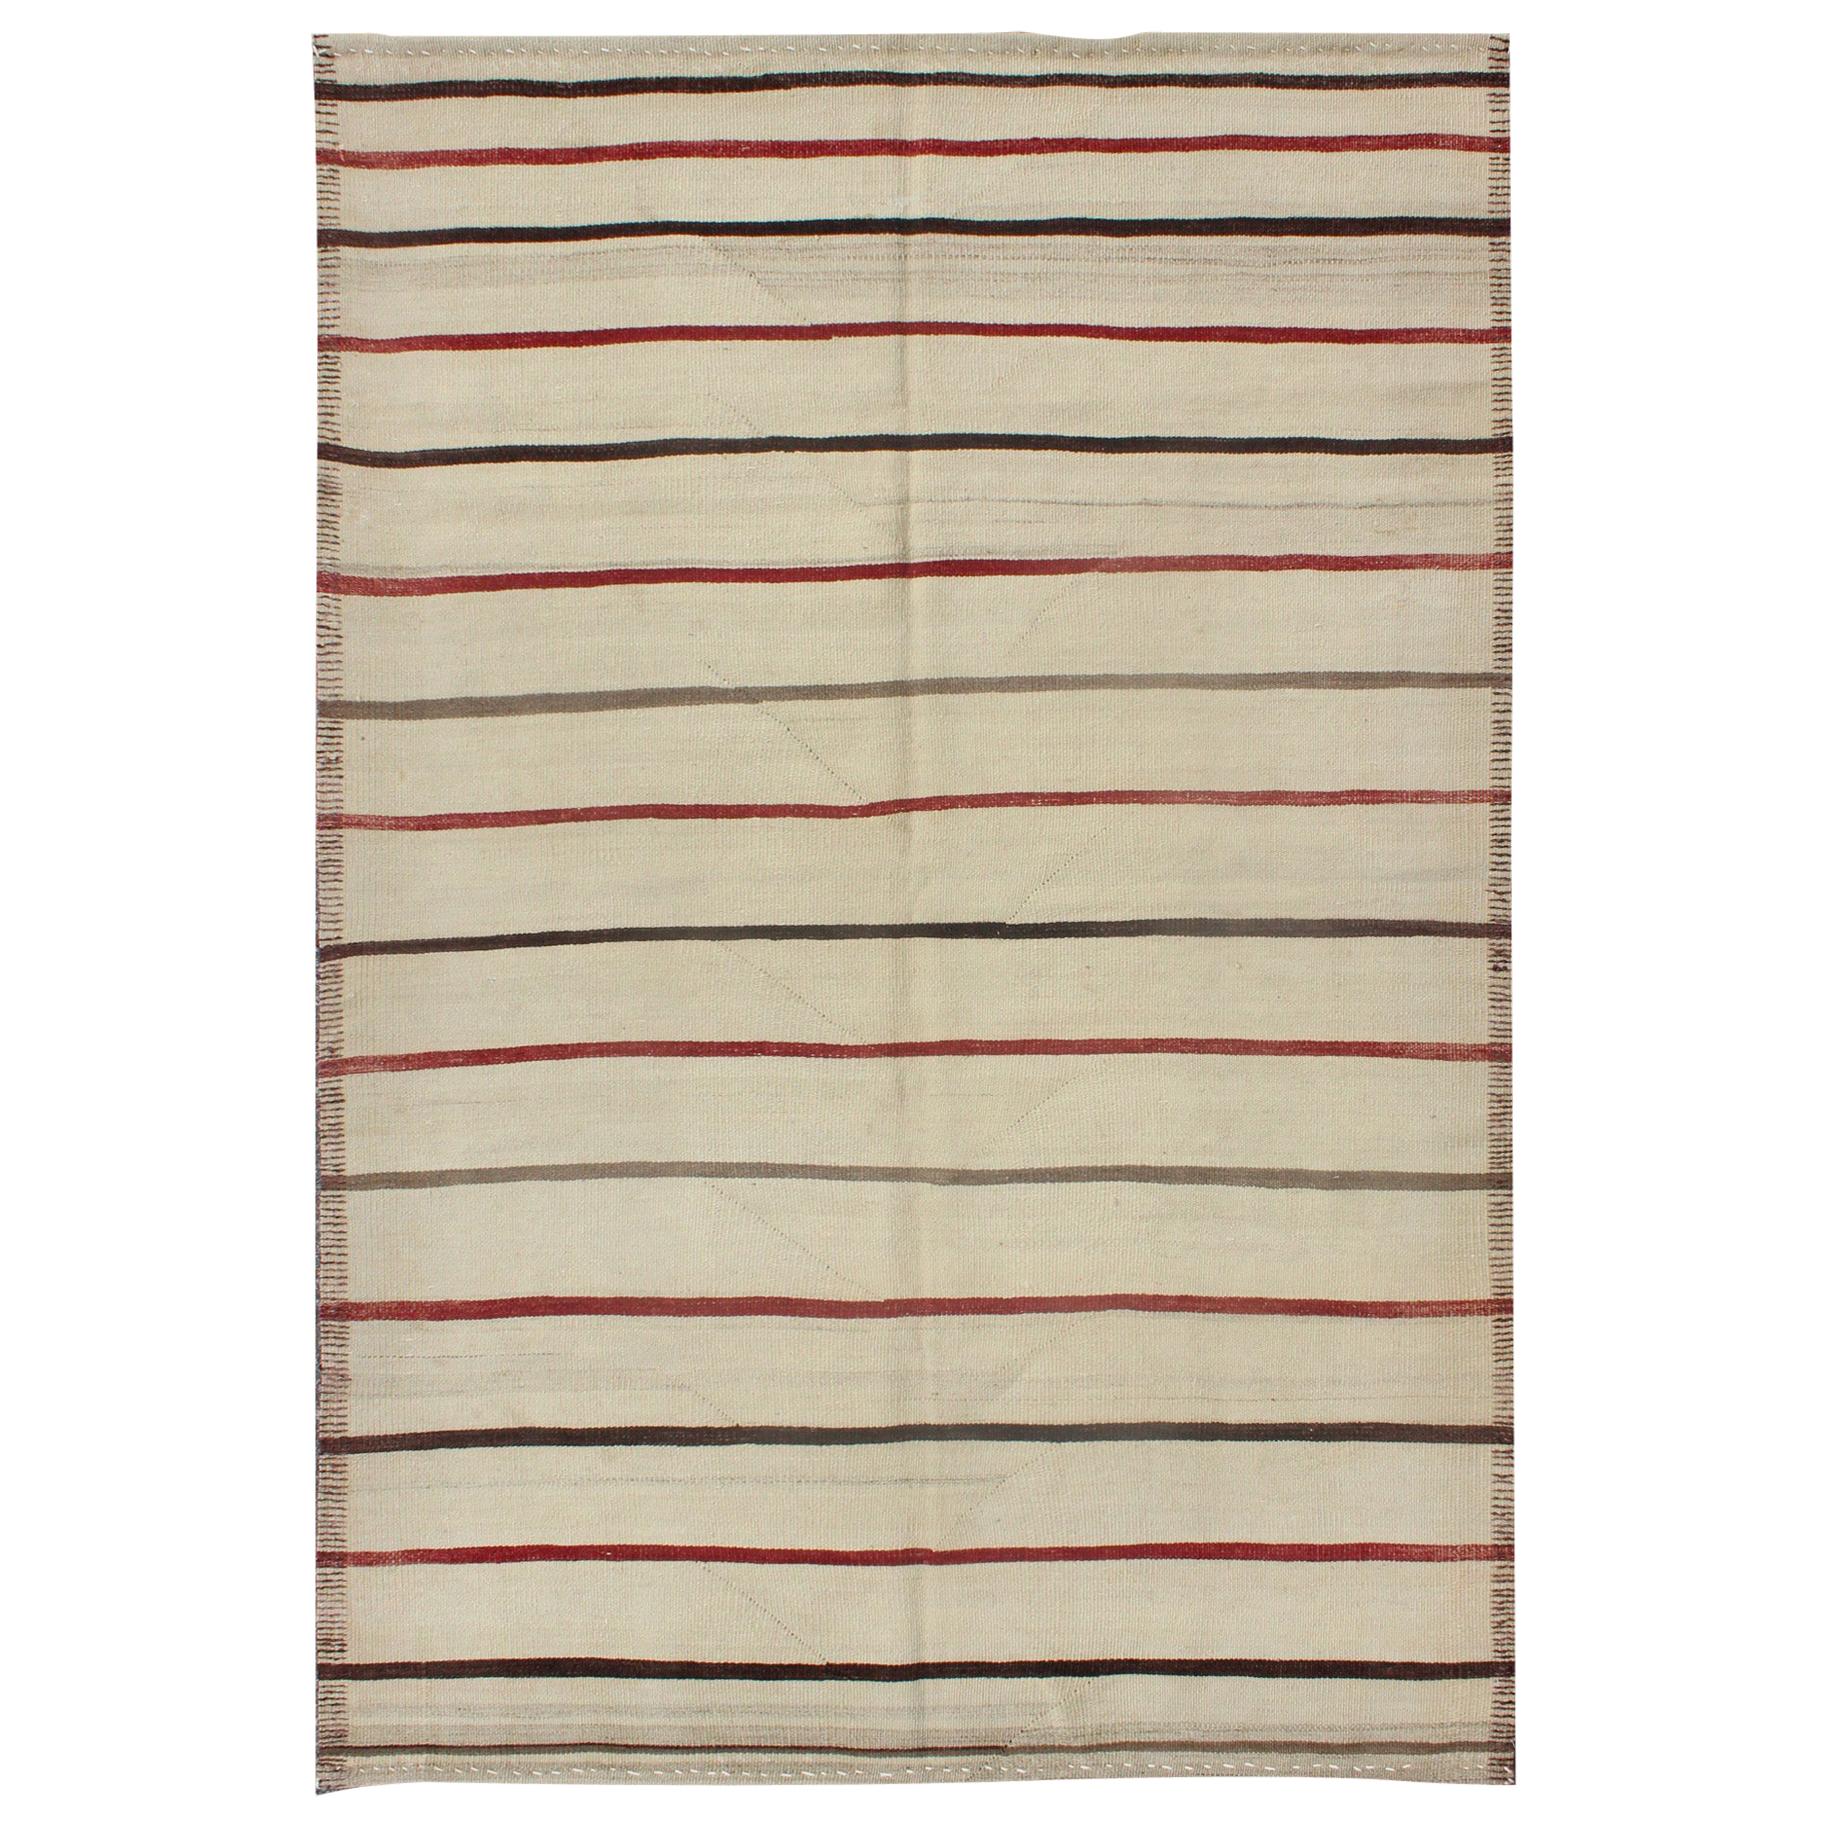 Vintage Hand Woven Kilim Turkish on Cream Background with Red and Blue Stripes